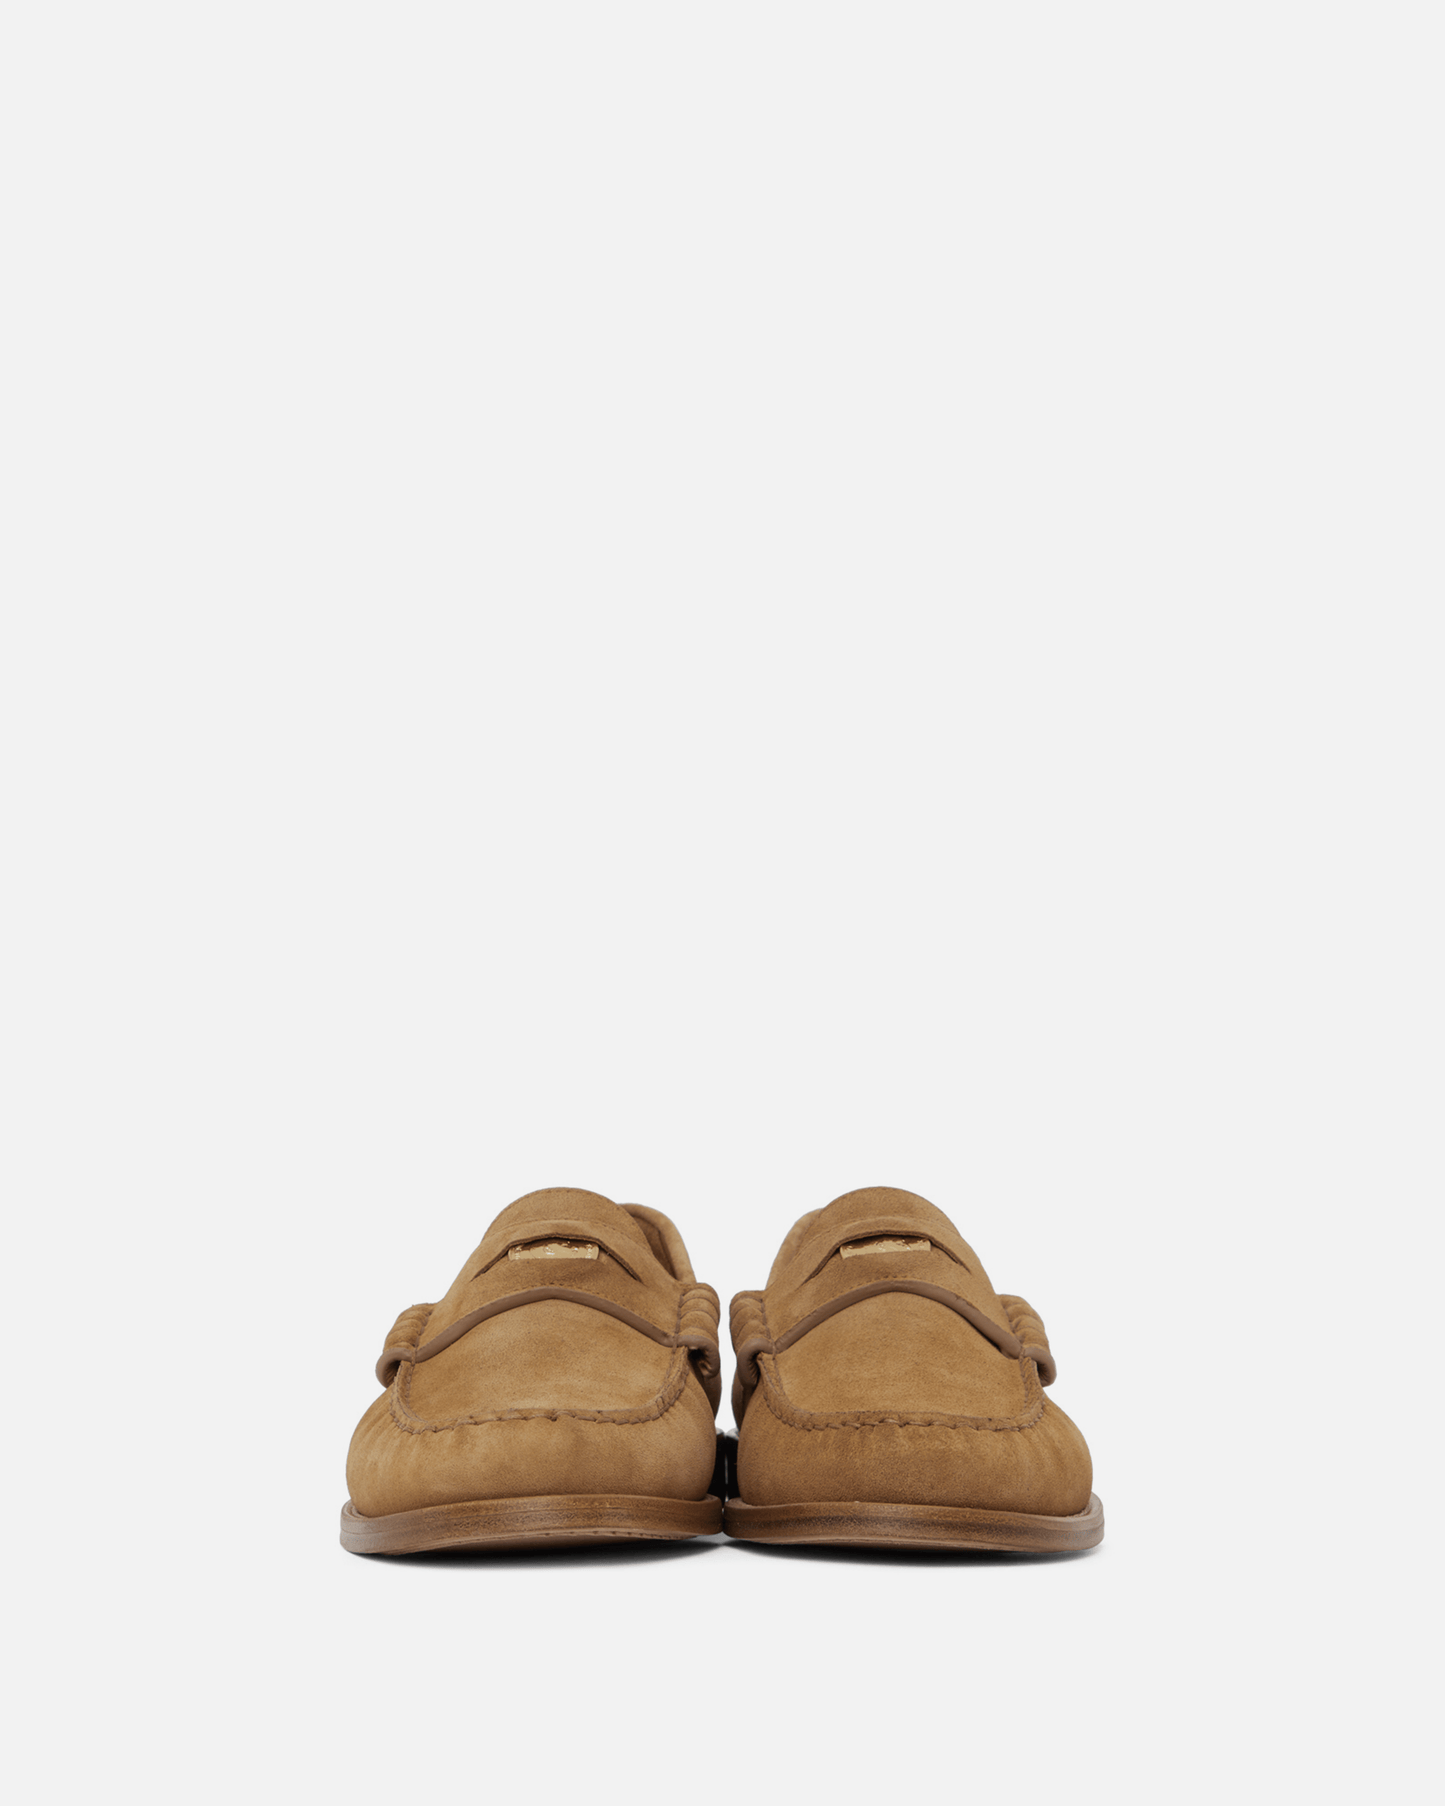 Rhude Men's Shoes Suede Penny Loafers in Tan